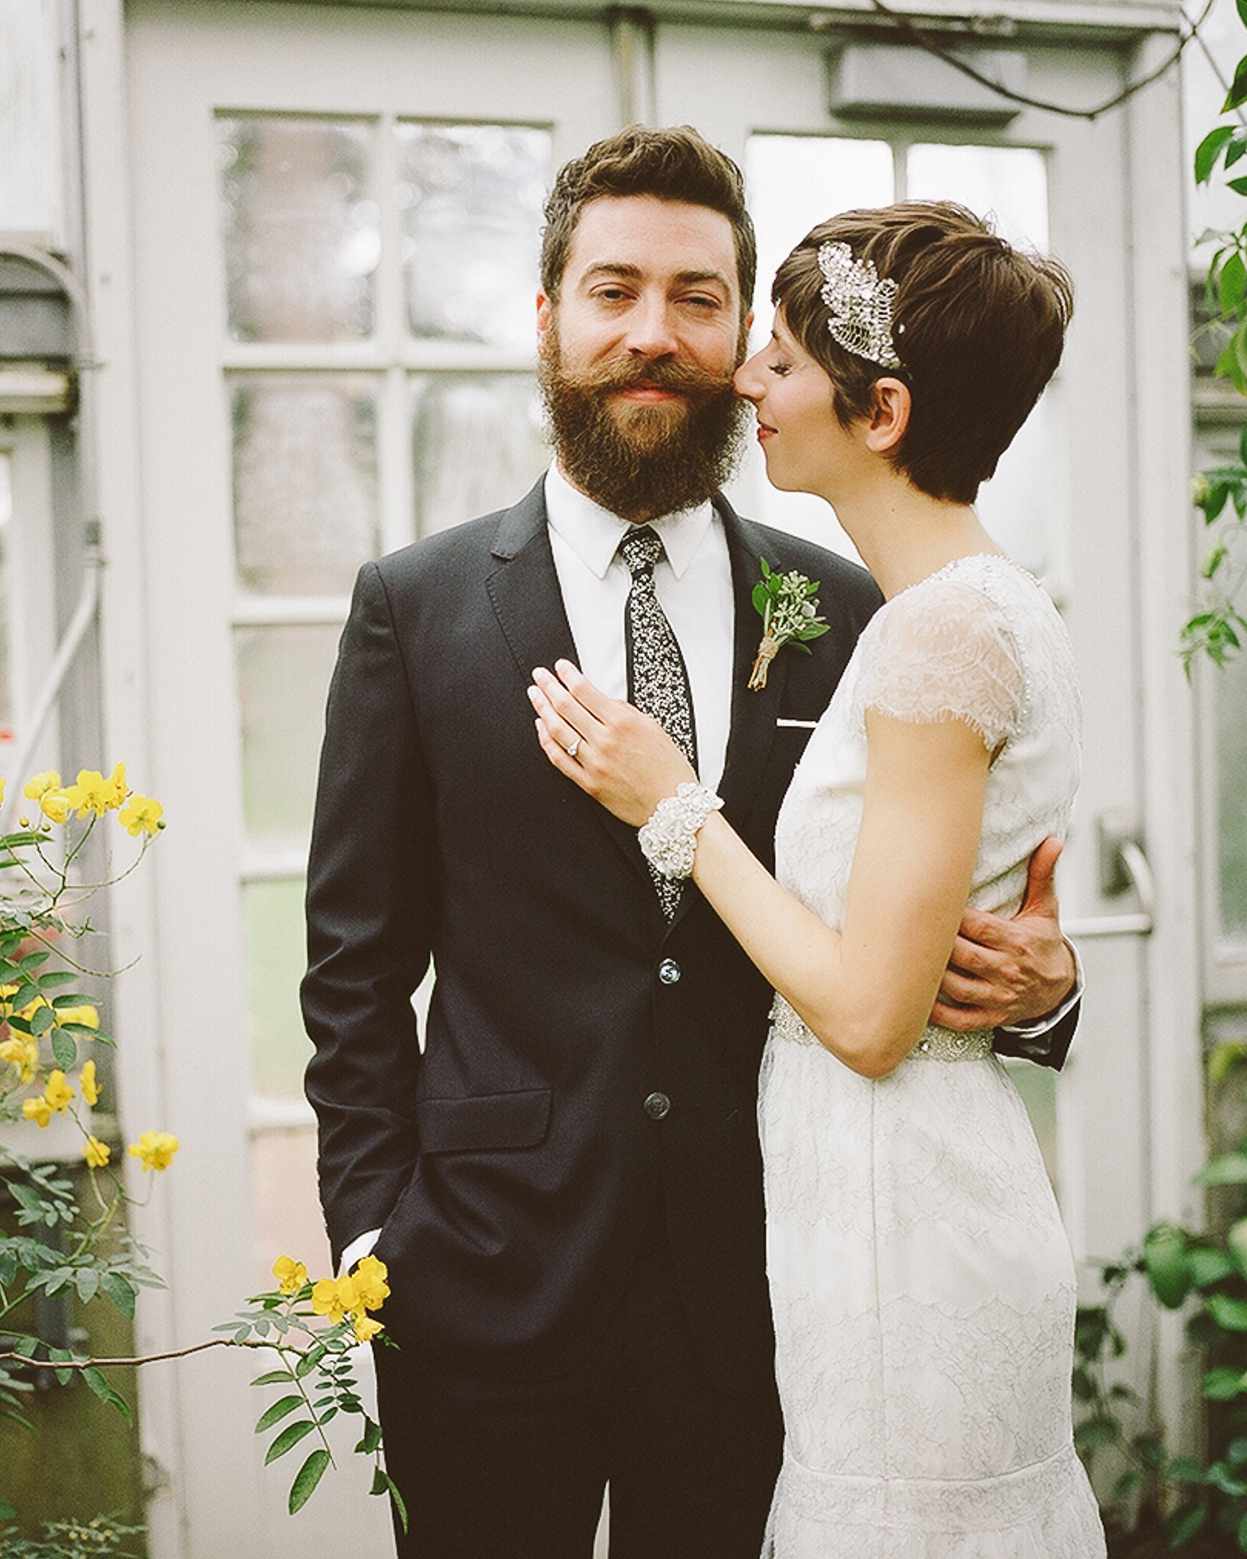 Beard styles for marriage